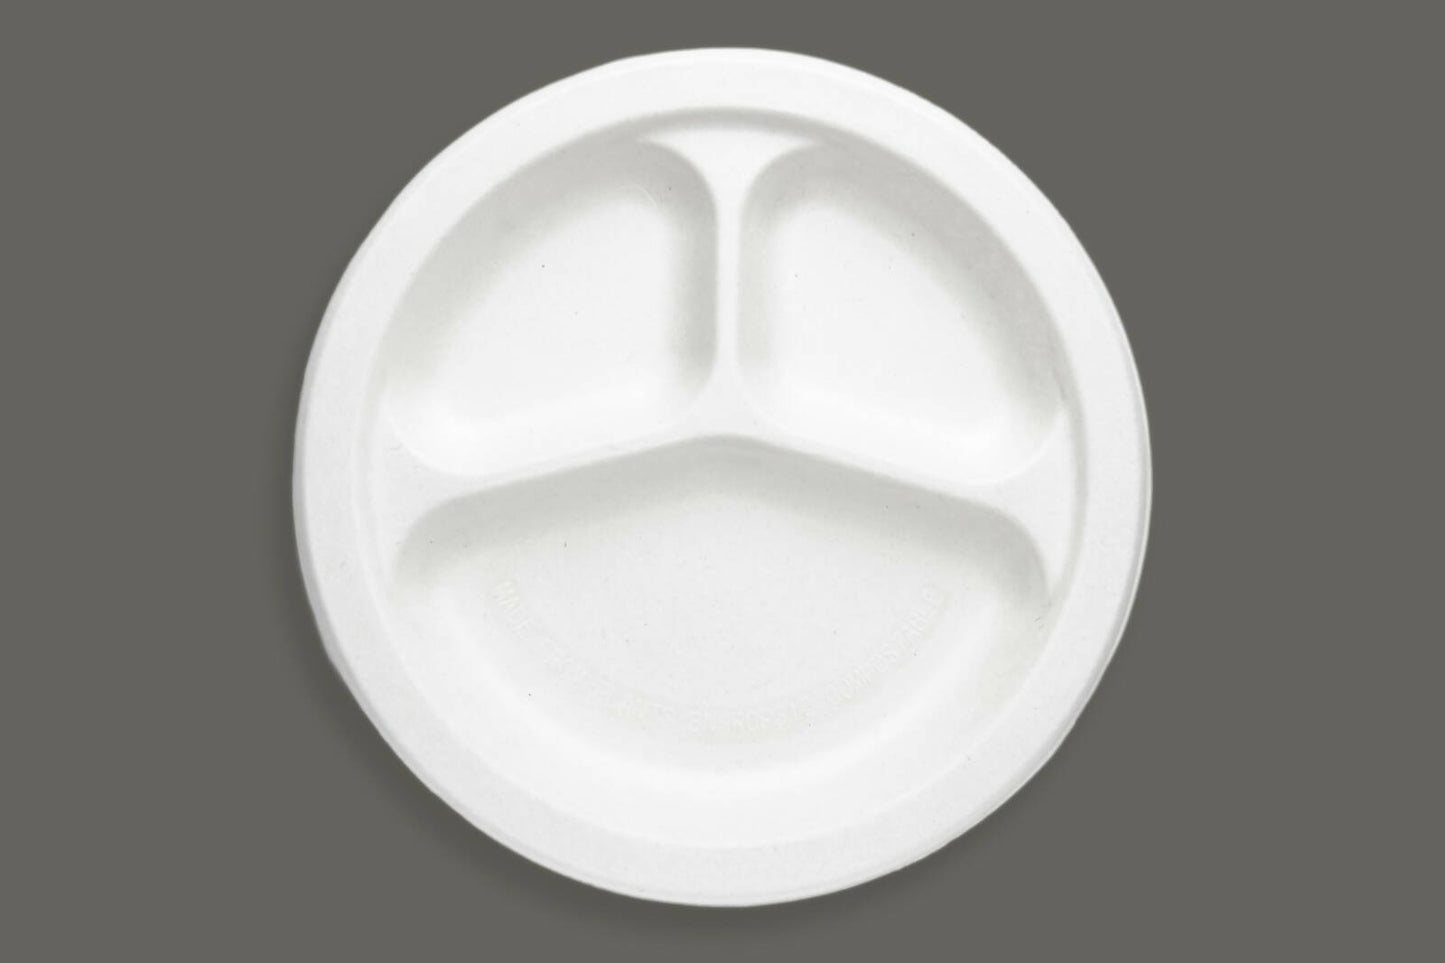 3 Compartment Plate - 10 Inch